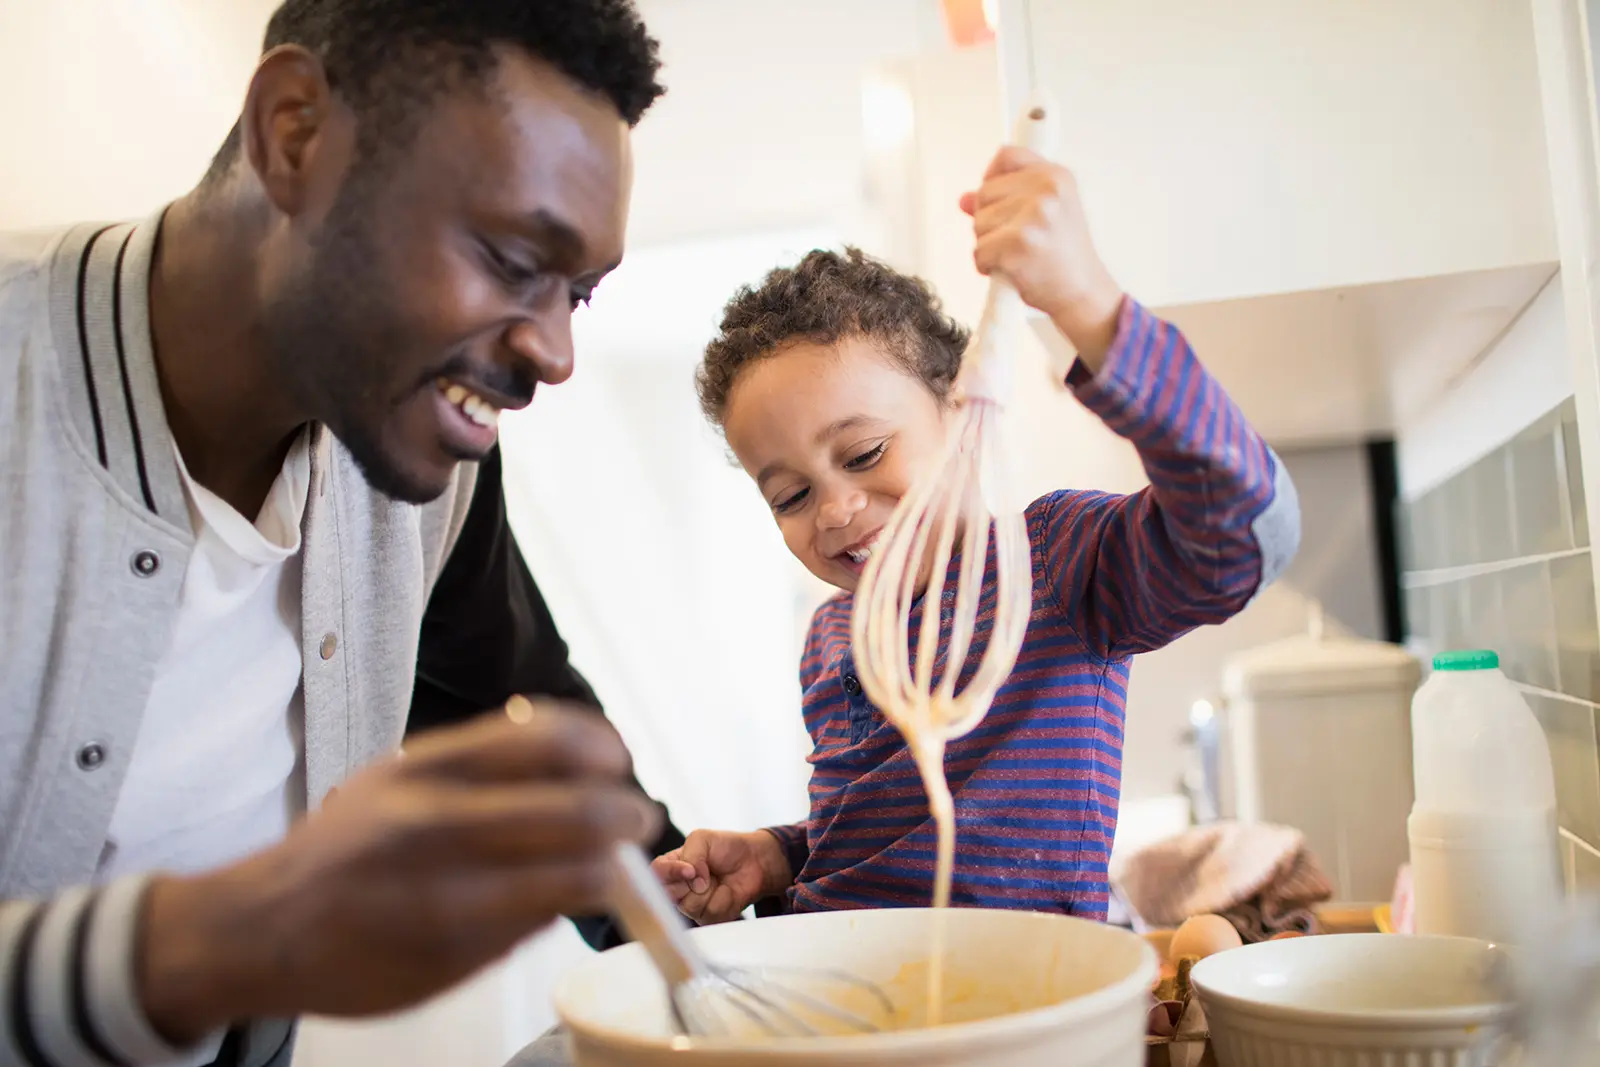 Parent stirring bowl of batter in kitchen next to child holding whisk dripping batter